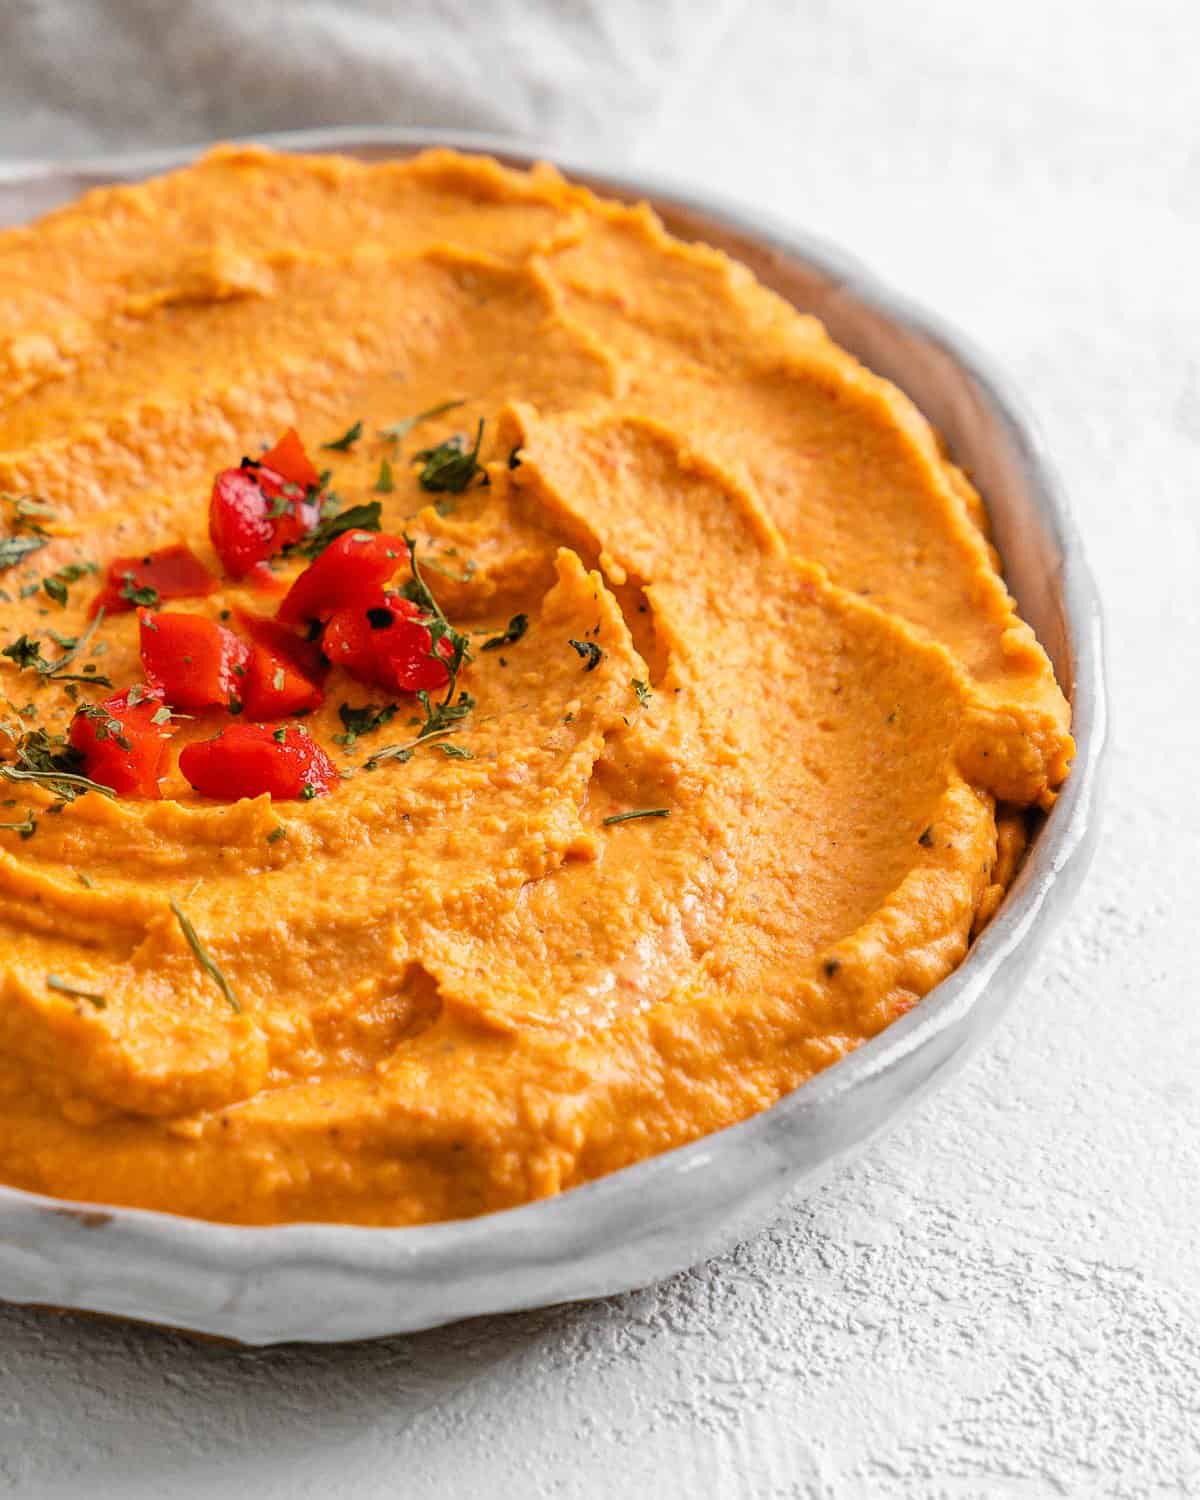 completed Smoky Roasted Red Pepper Hummus against a white background